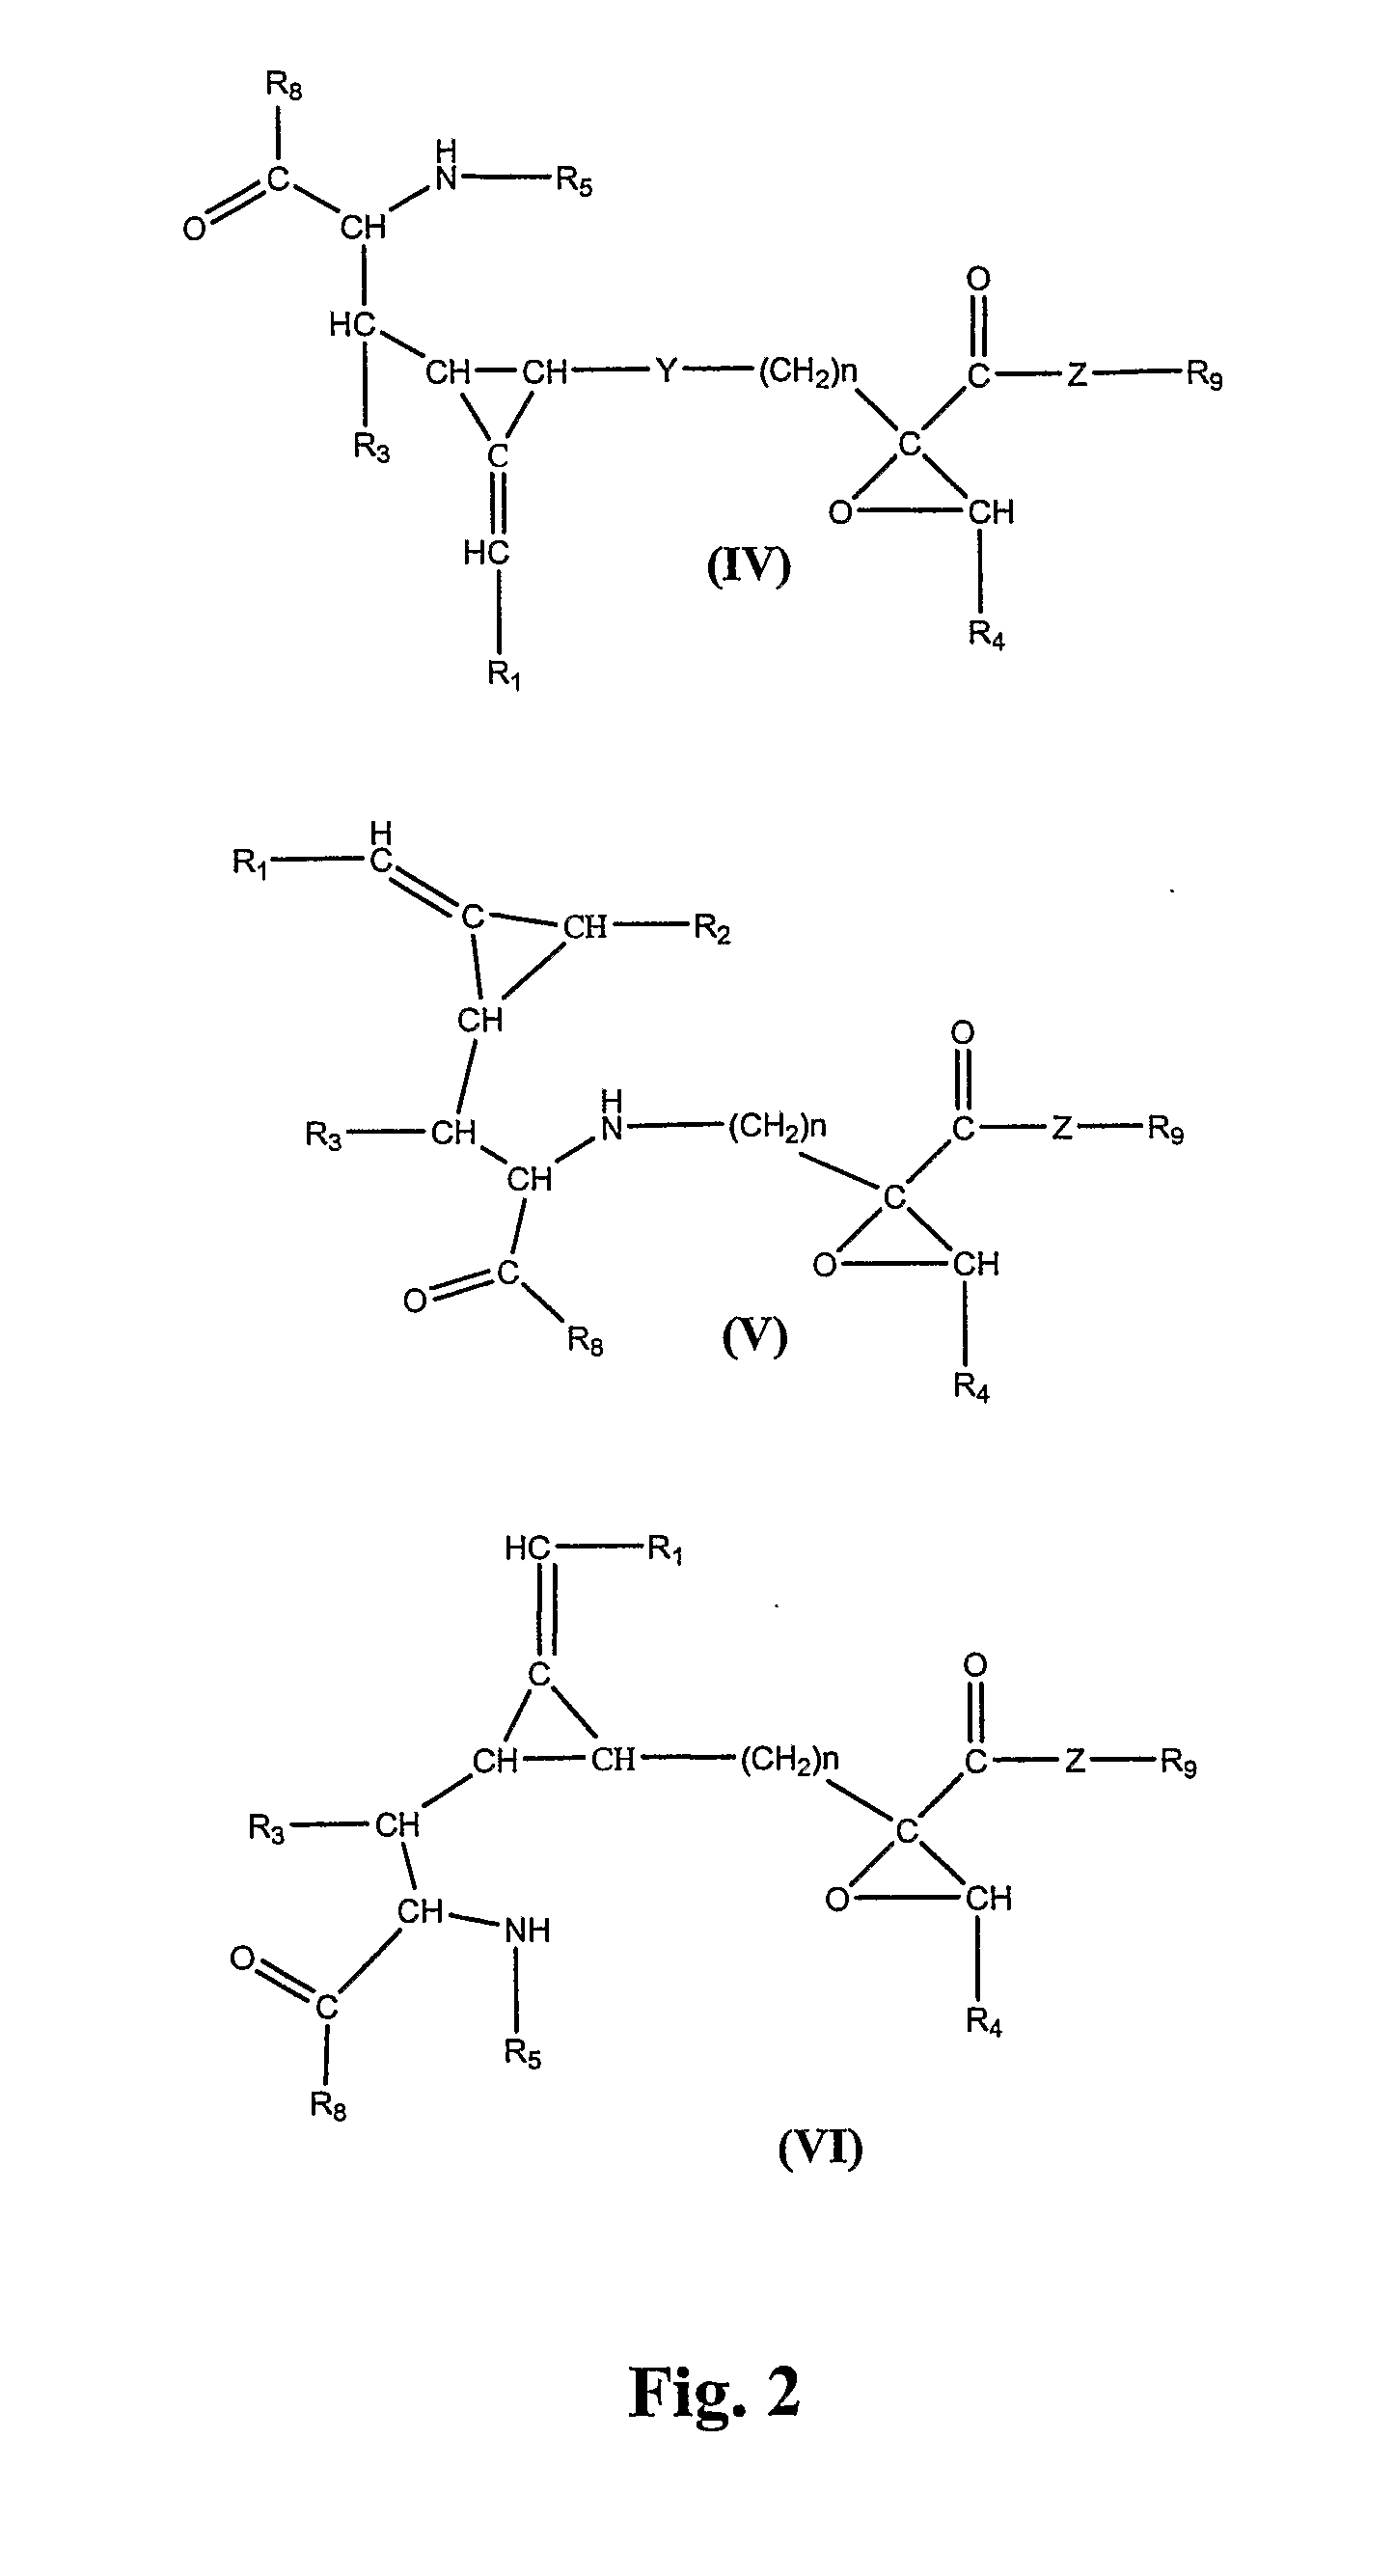 Systems and methods for treating human inflammatory and proliferative diseases, with a combination of compounds, or a bifunctional compound, that provides fatty acid metabolism and glycolysis inhibition